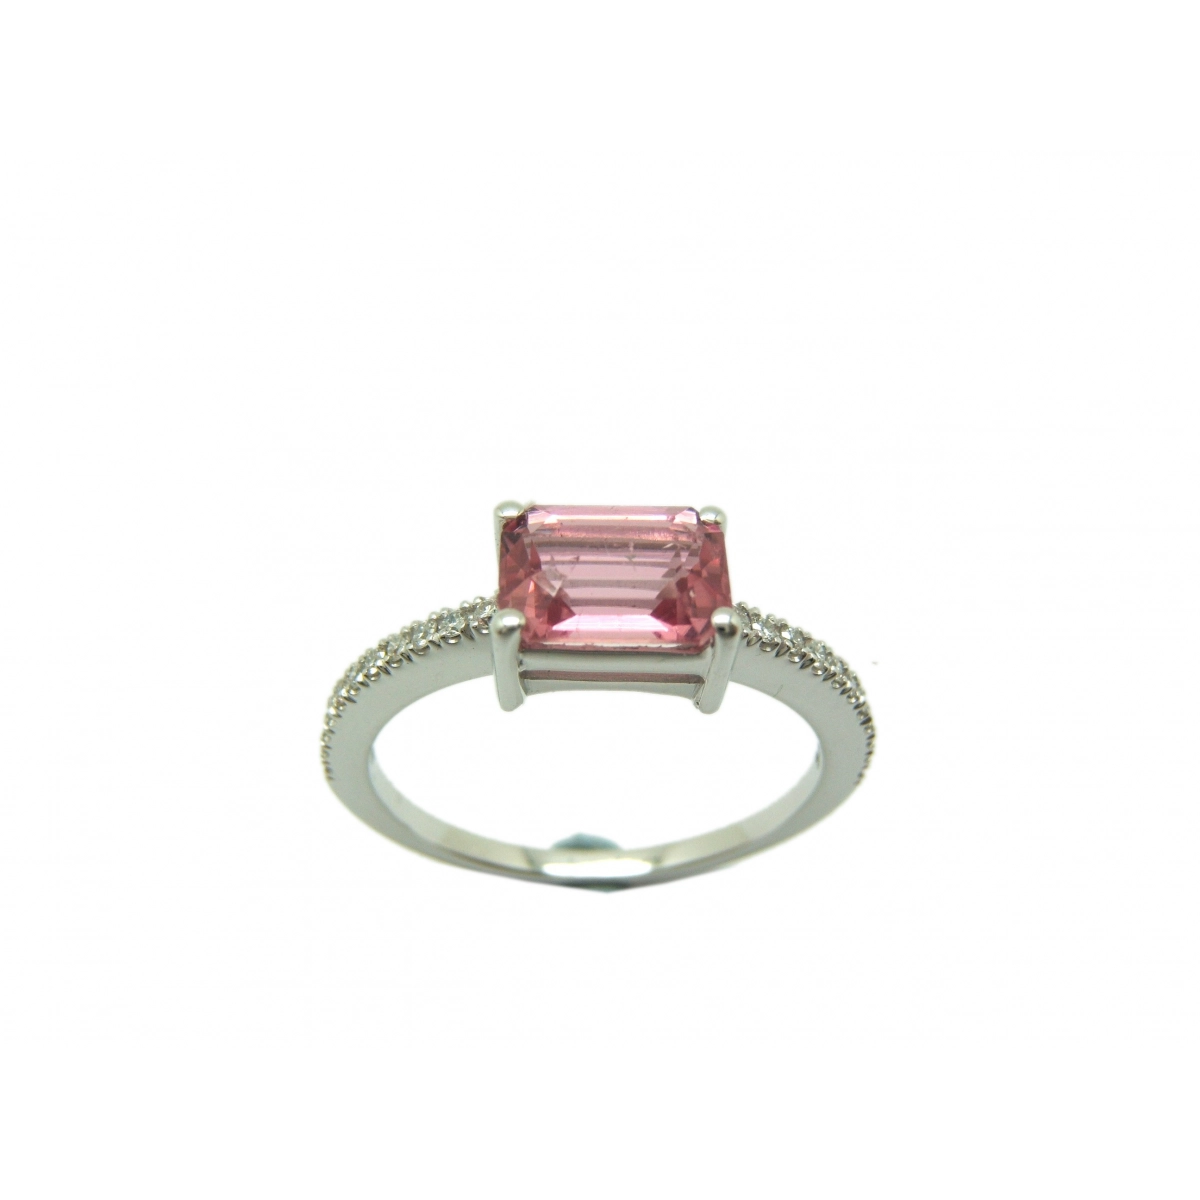 RING WHITE GOLD RUBELLITE AND DIAMOND-417 B-79 A-417